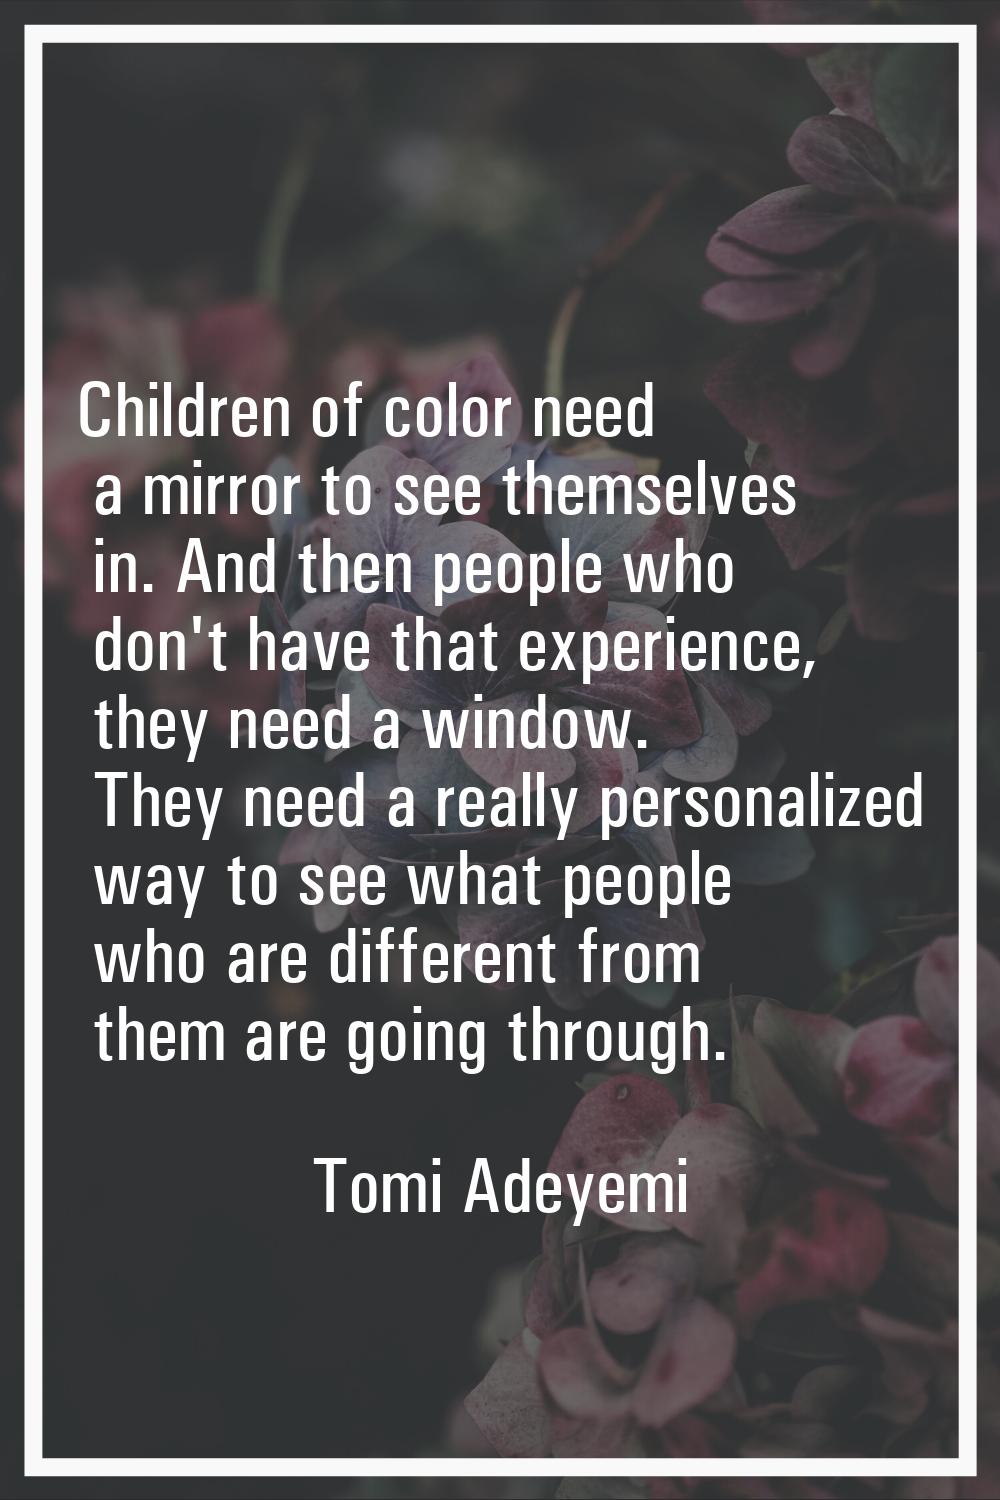 Children of color need a mirror to see themselves in. And then people who don't have that experienc